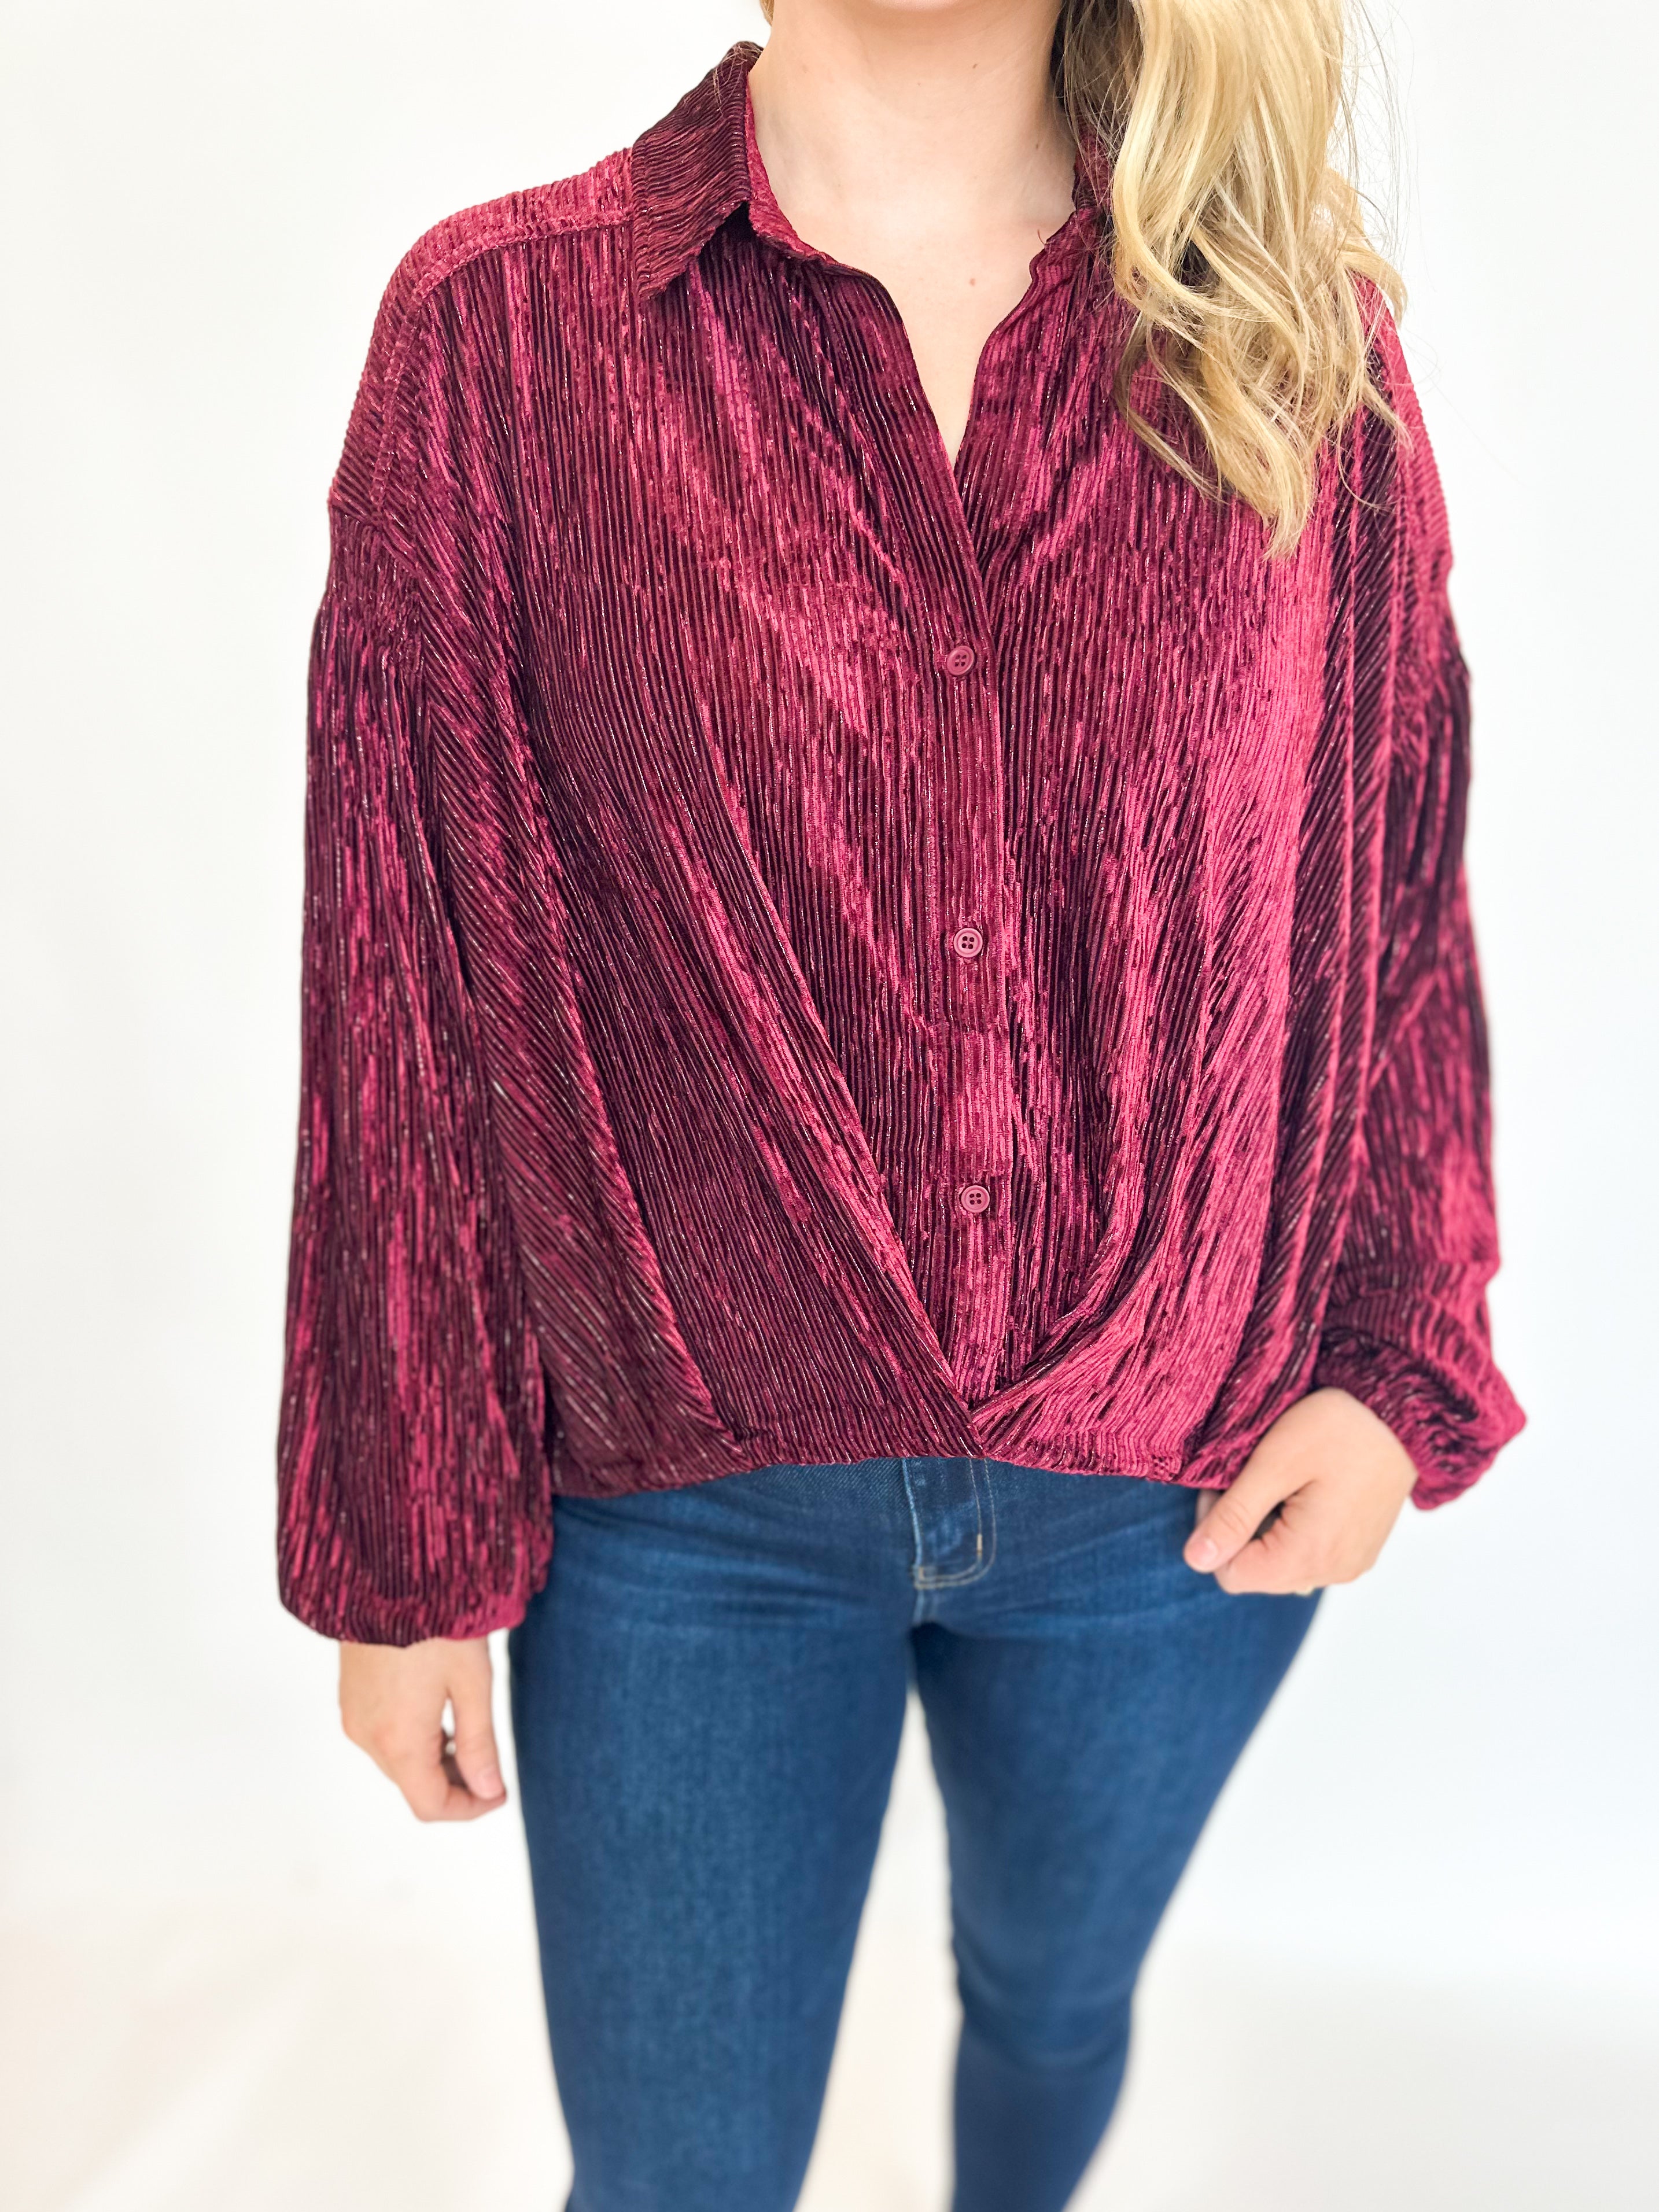 Textured Velvet Blouse - Burgundy-200 Fashion Blouses-SKIES ARE BLUE-July & June Women's Fashion Boutique Located in San Antonio, Texas